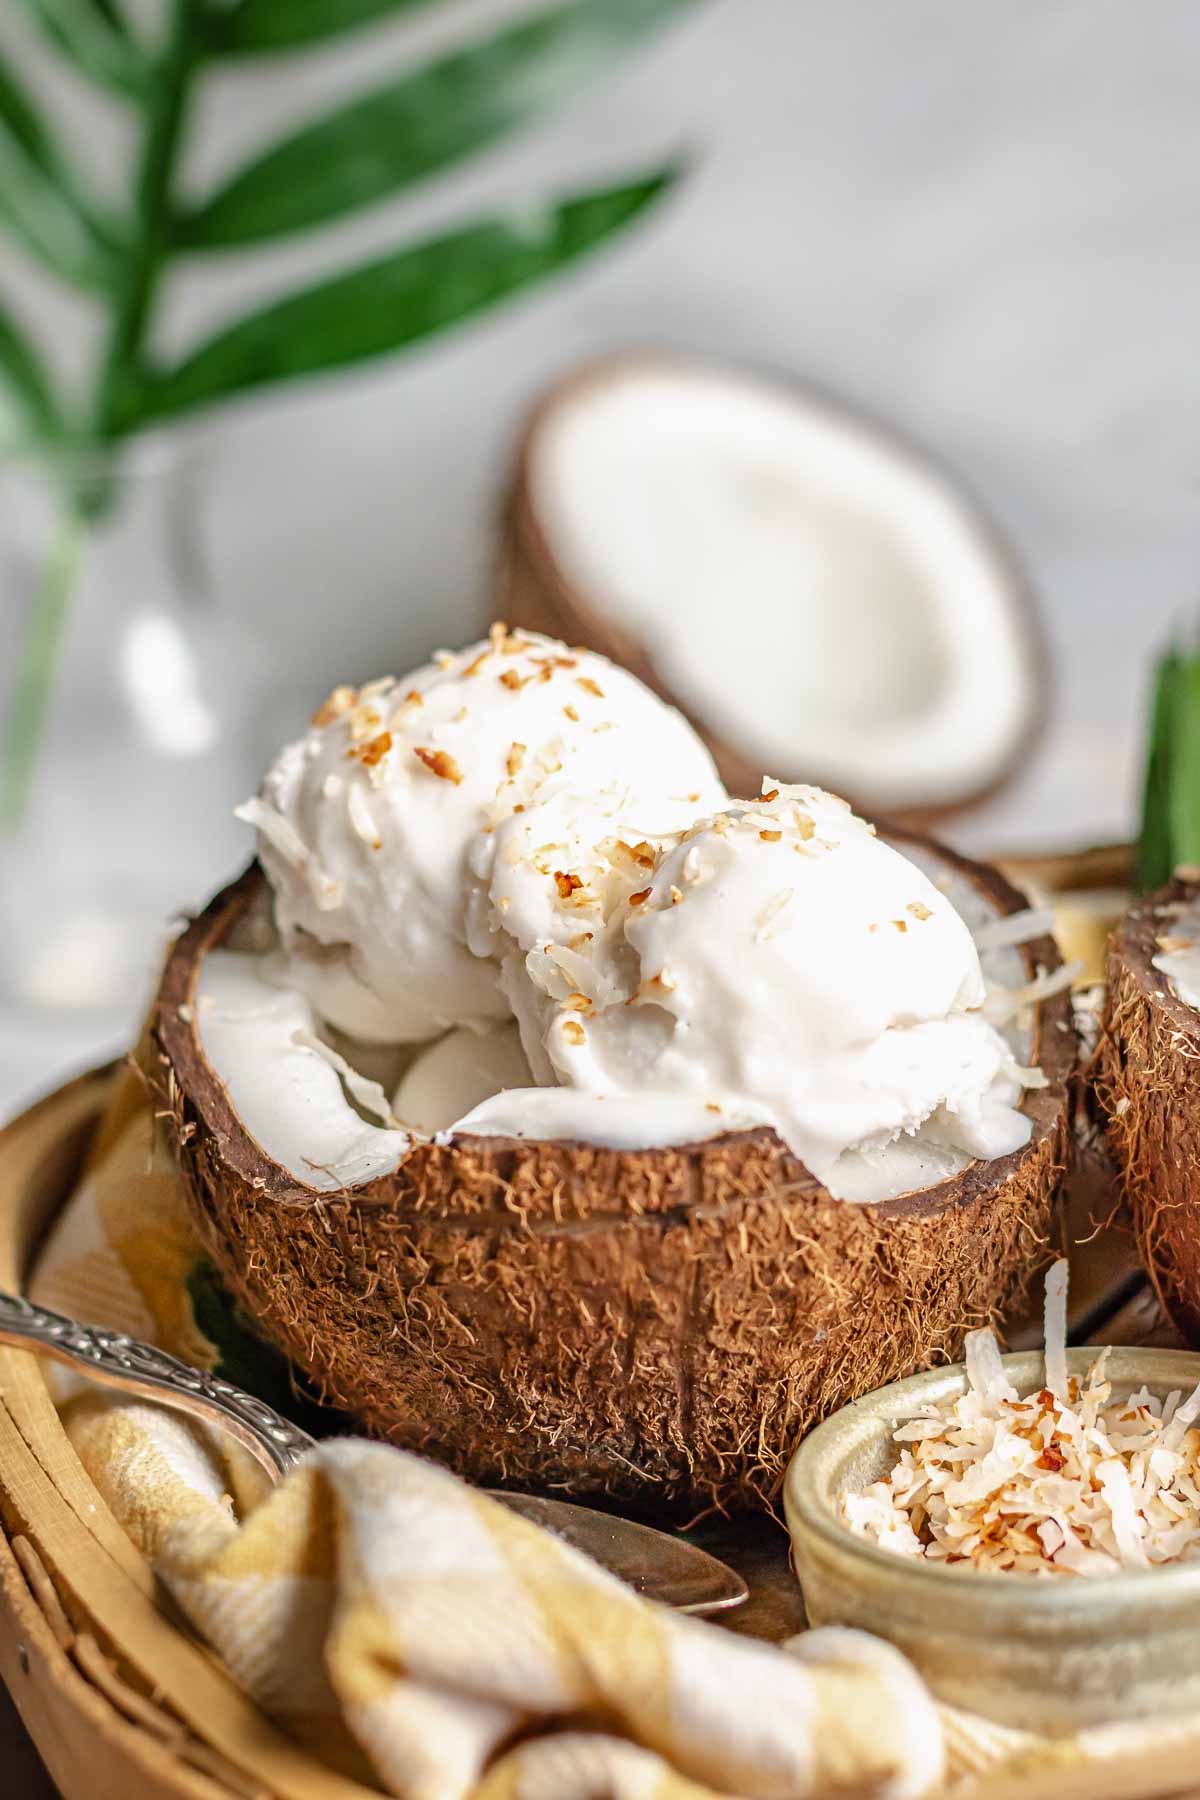 Scoops of coconut sorbet in a coconut shell.